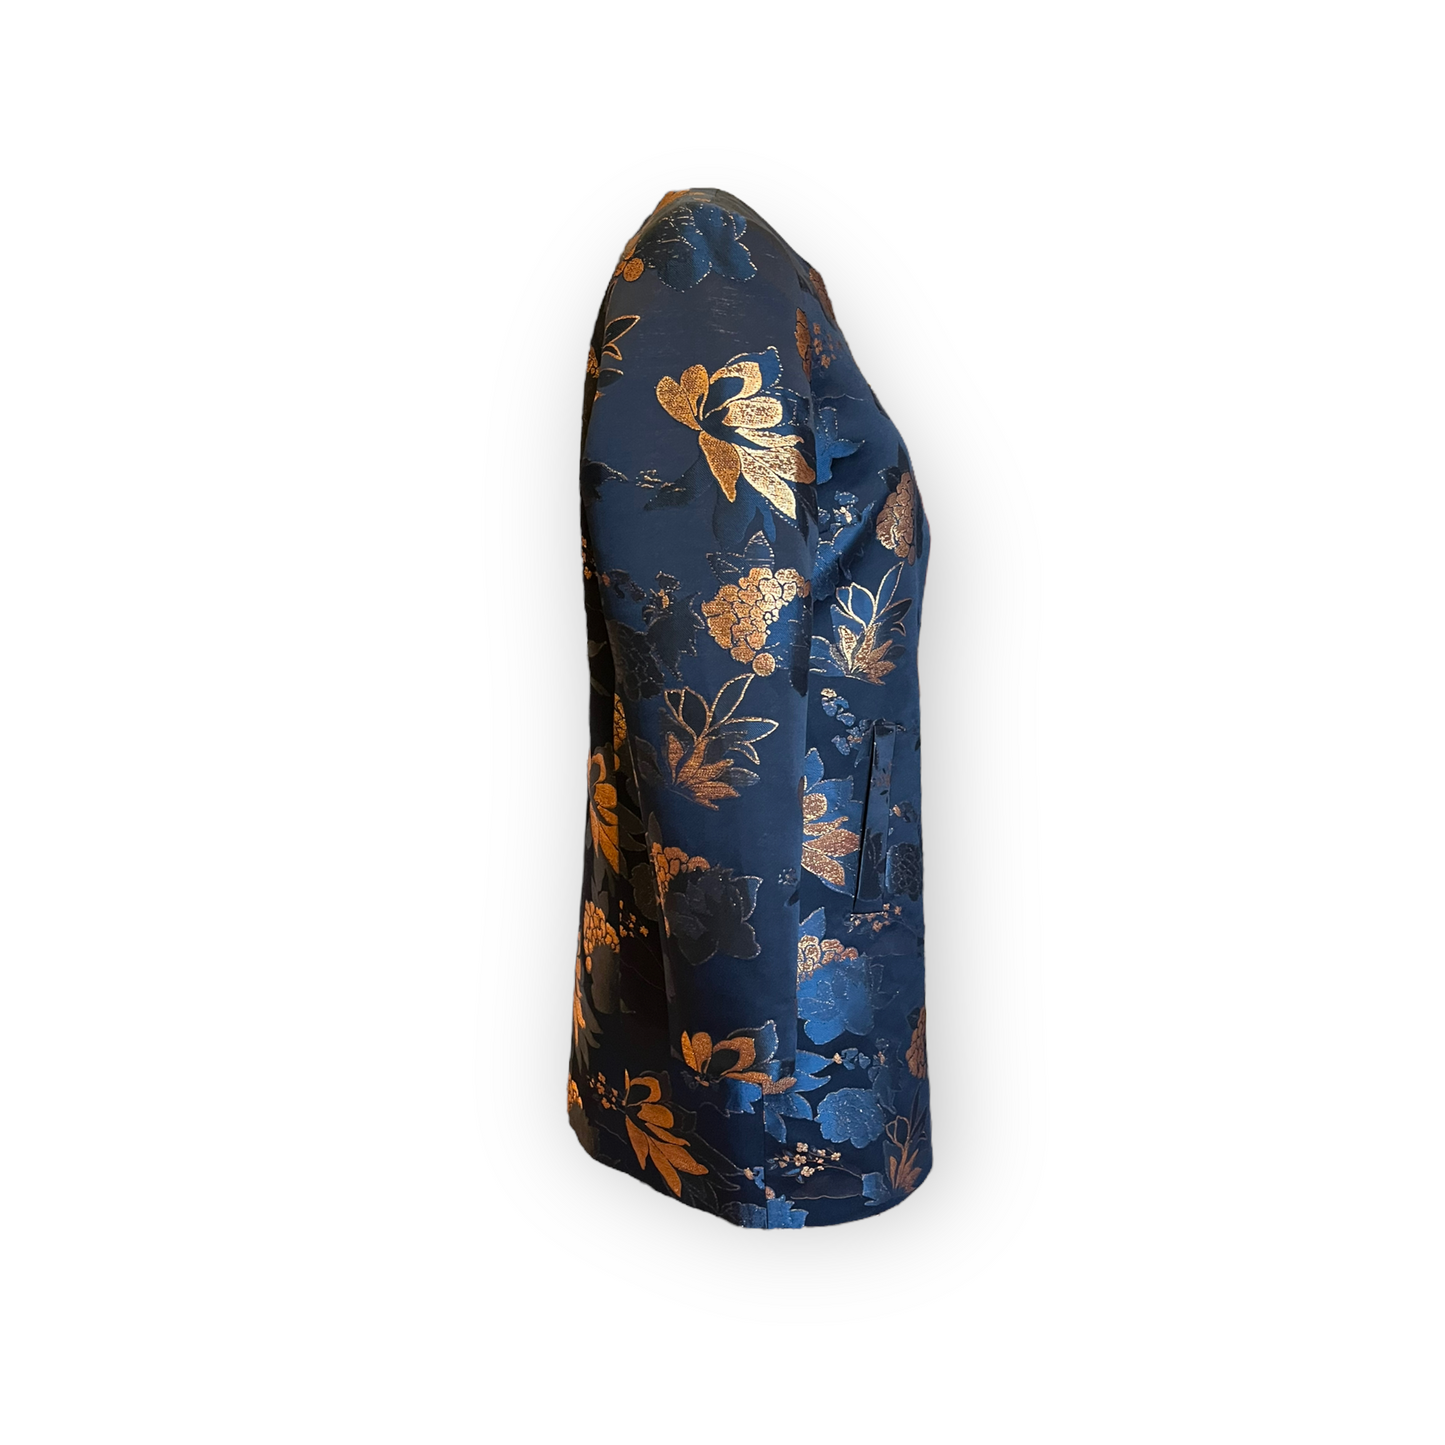 Navy and Bronze Floral Coat